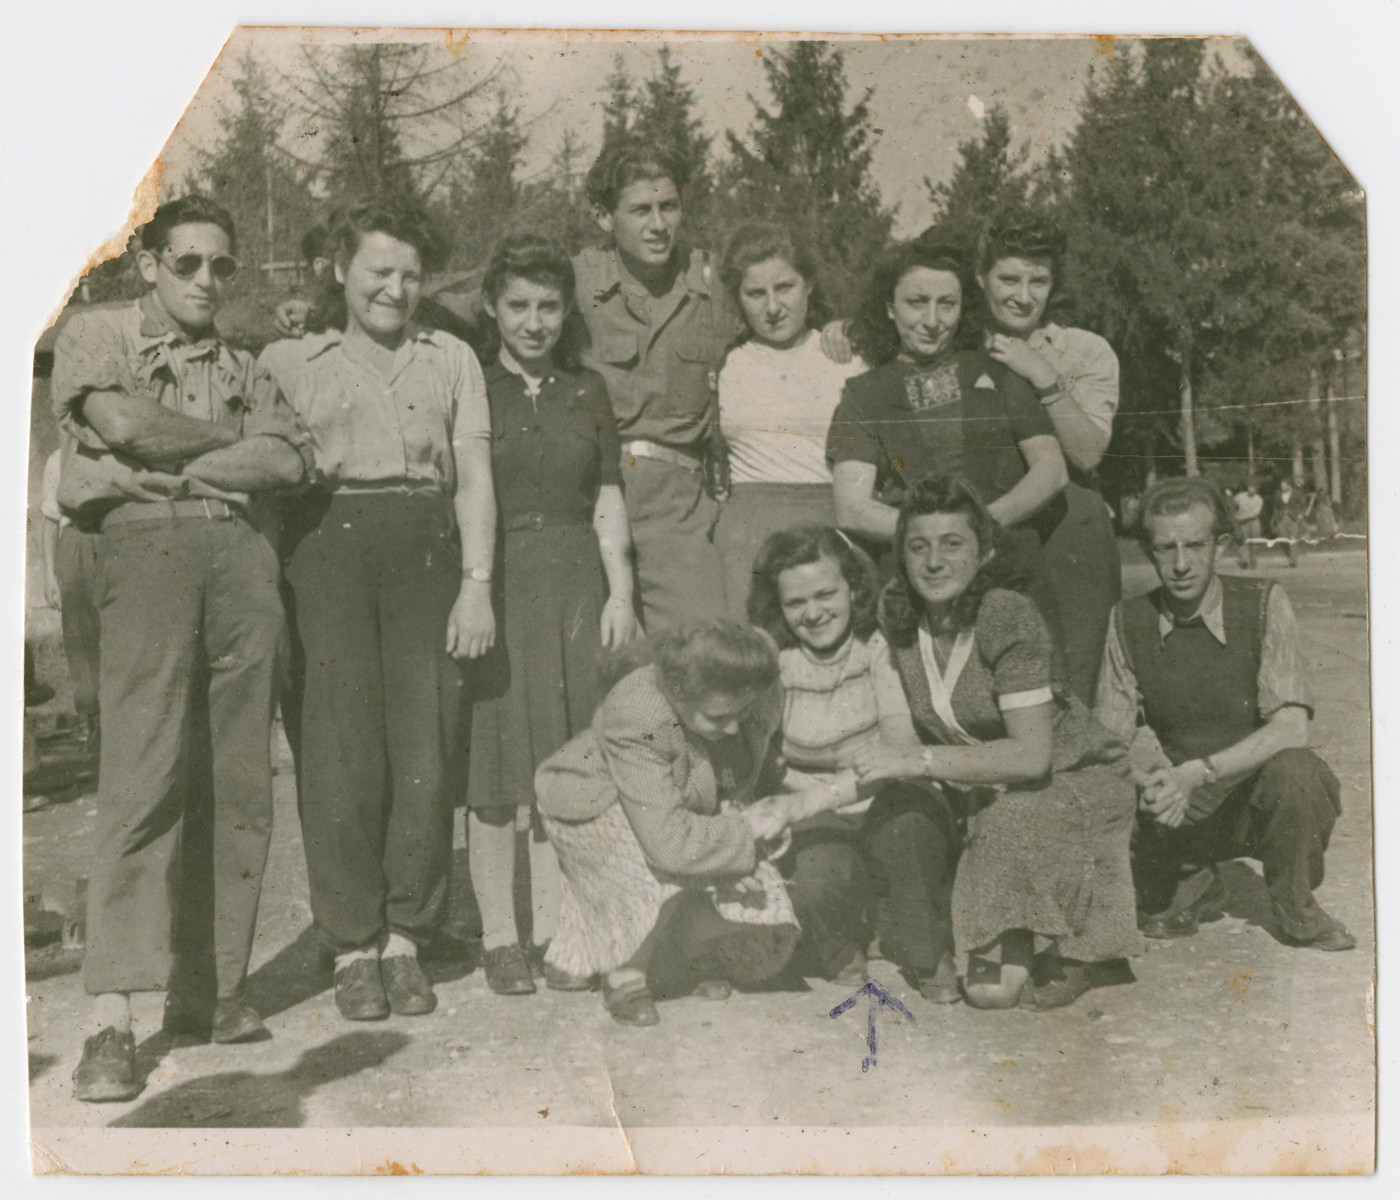 Group portrait of young people in the Feldafing displaced camp prior to their immigration to Israel.

Rachel Gutner is pictured in the center.